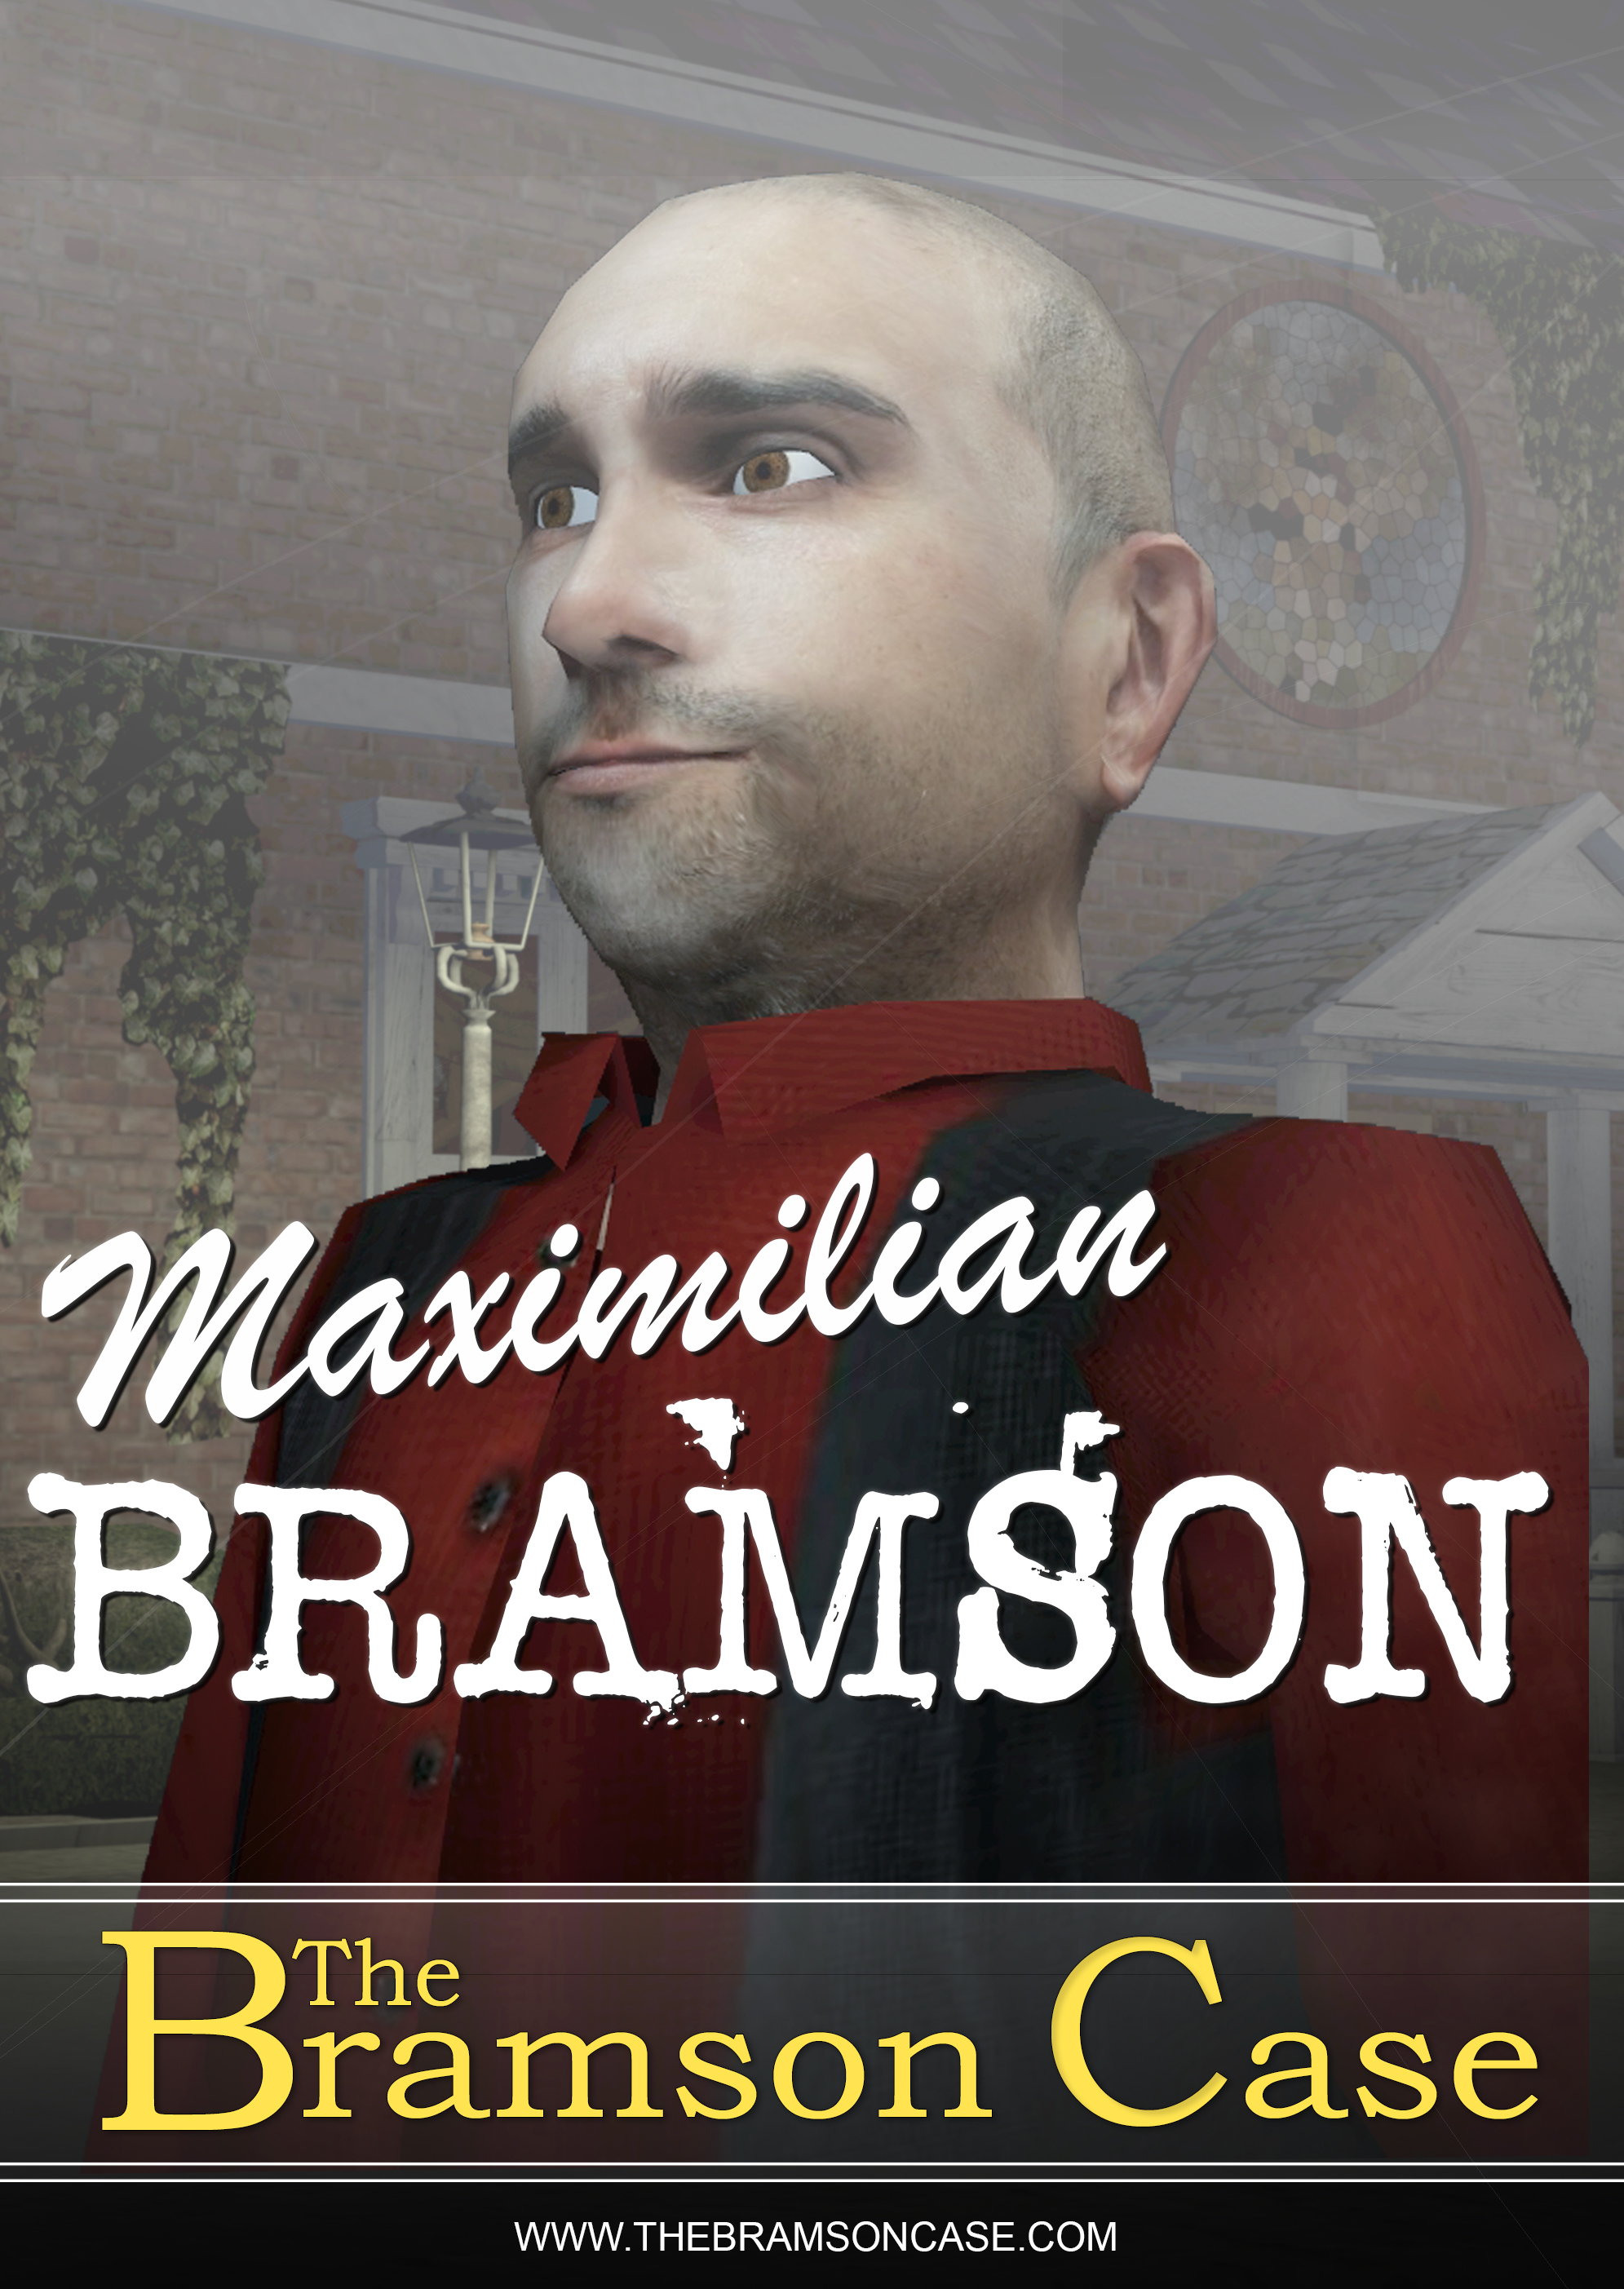 the bramson case, characters, cthulhu,lovecraft, maximilian bramson